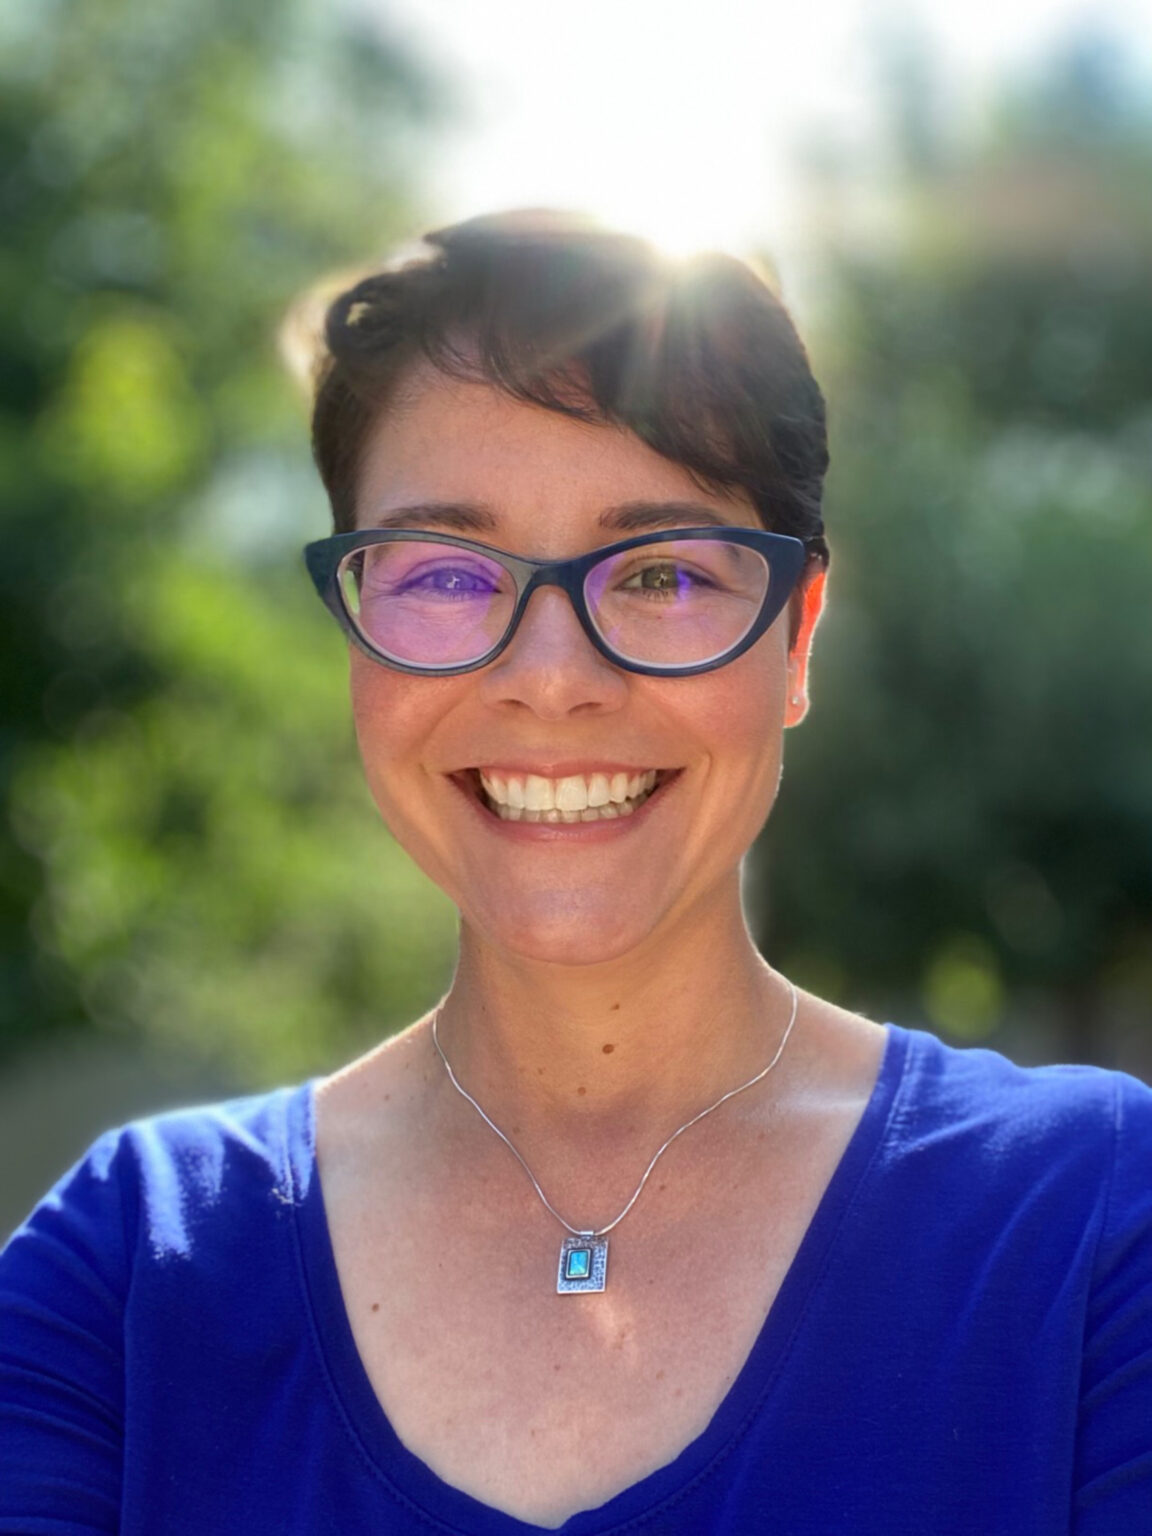 Picture of Ti Macklin smiling. Ti is a white woman with cropped brown hair. She is wearing blue framed glasses, a blue shirt, and is standing in front of a blurred background of nature.